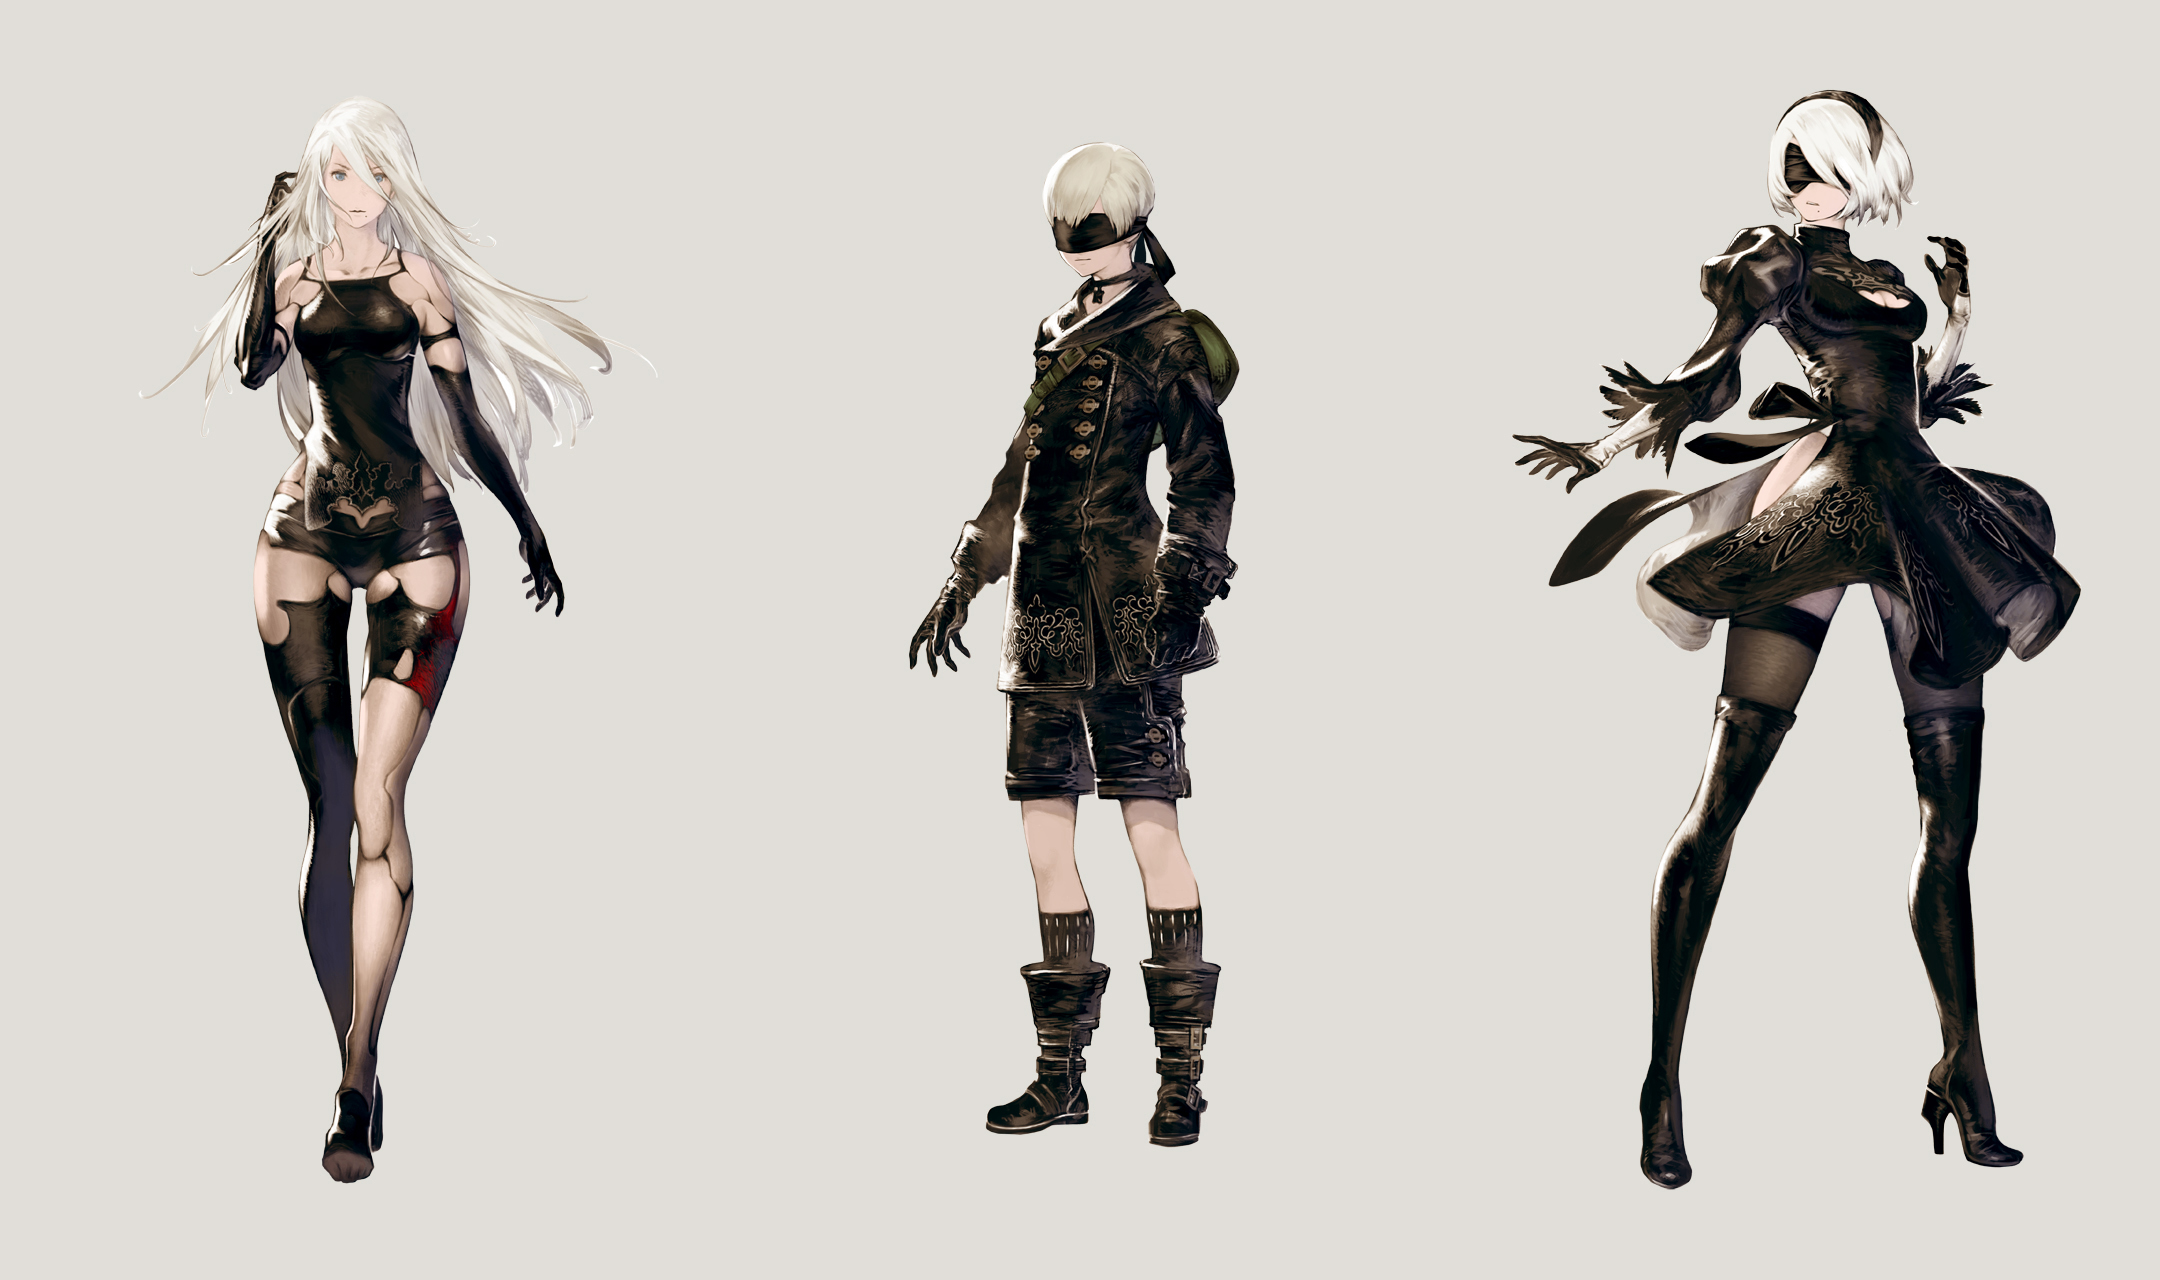 Nier Automata 2B Nier Automata A2 Nier Automata High Heels High Heeled Boots Leather Boots Thigh Hig 2160x1280